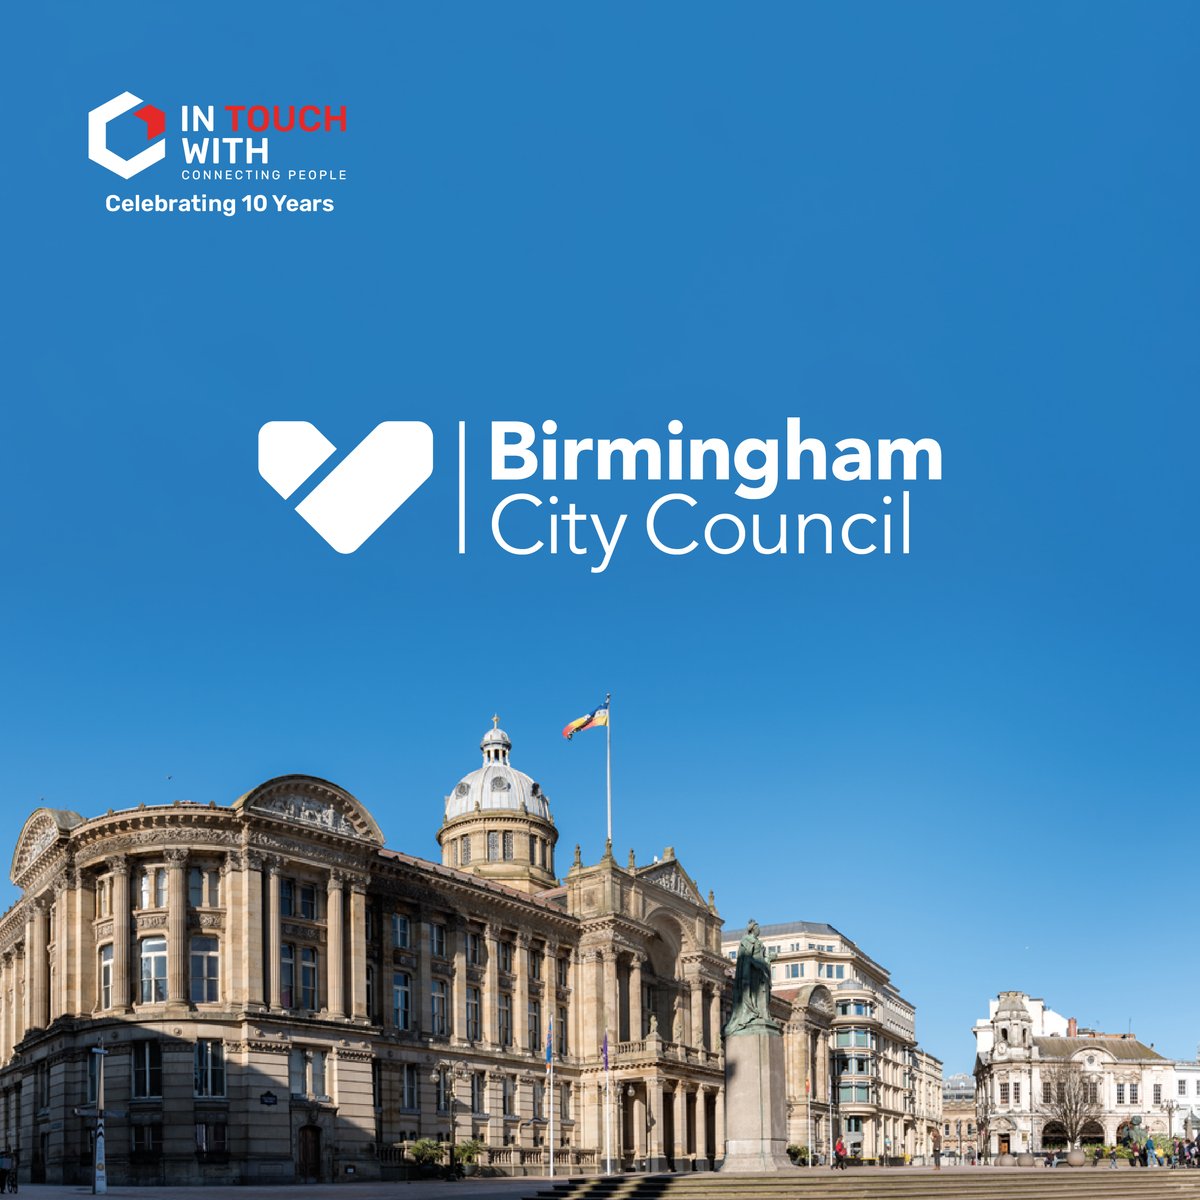 Birmingham City Council🏫

Together, we're paving the way for community empowerment and growth. 

Here's to progress and prosperity for all. 🌟 

#ITW #InTouchWith #ITWFamily #FODC #FieldofDreamsClub #CommunityPartners #BirminghamCityCouncil #FamilyPartner #BCC